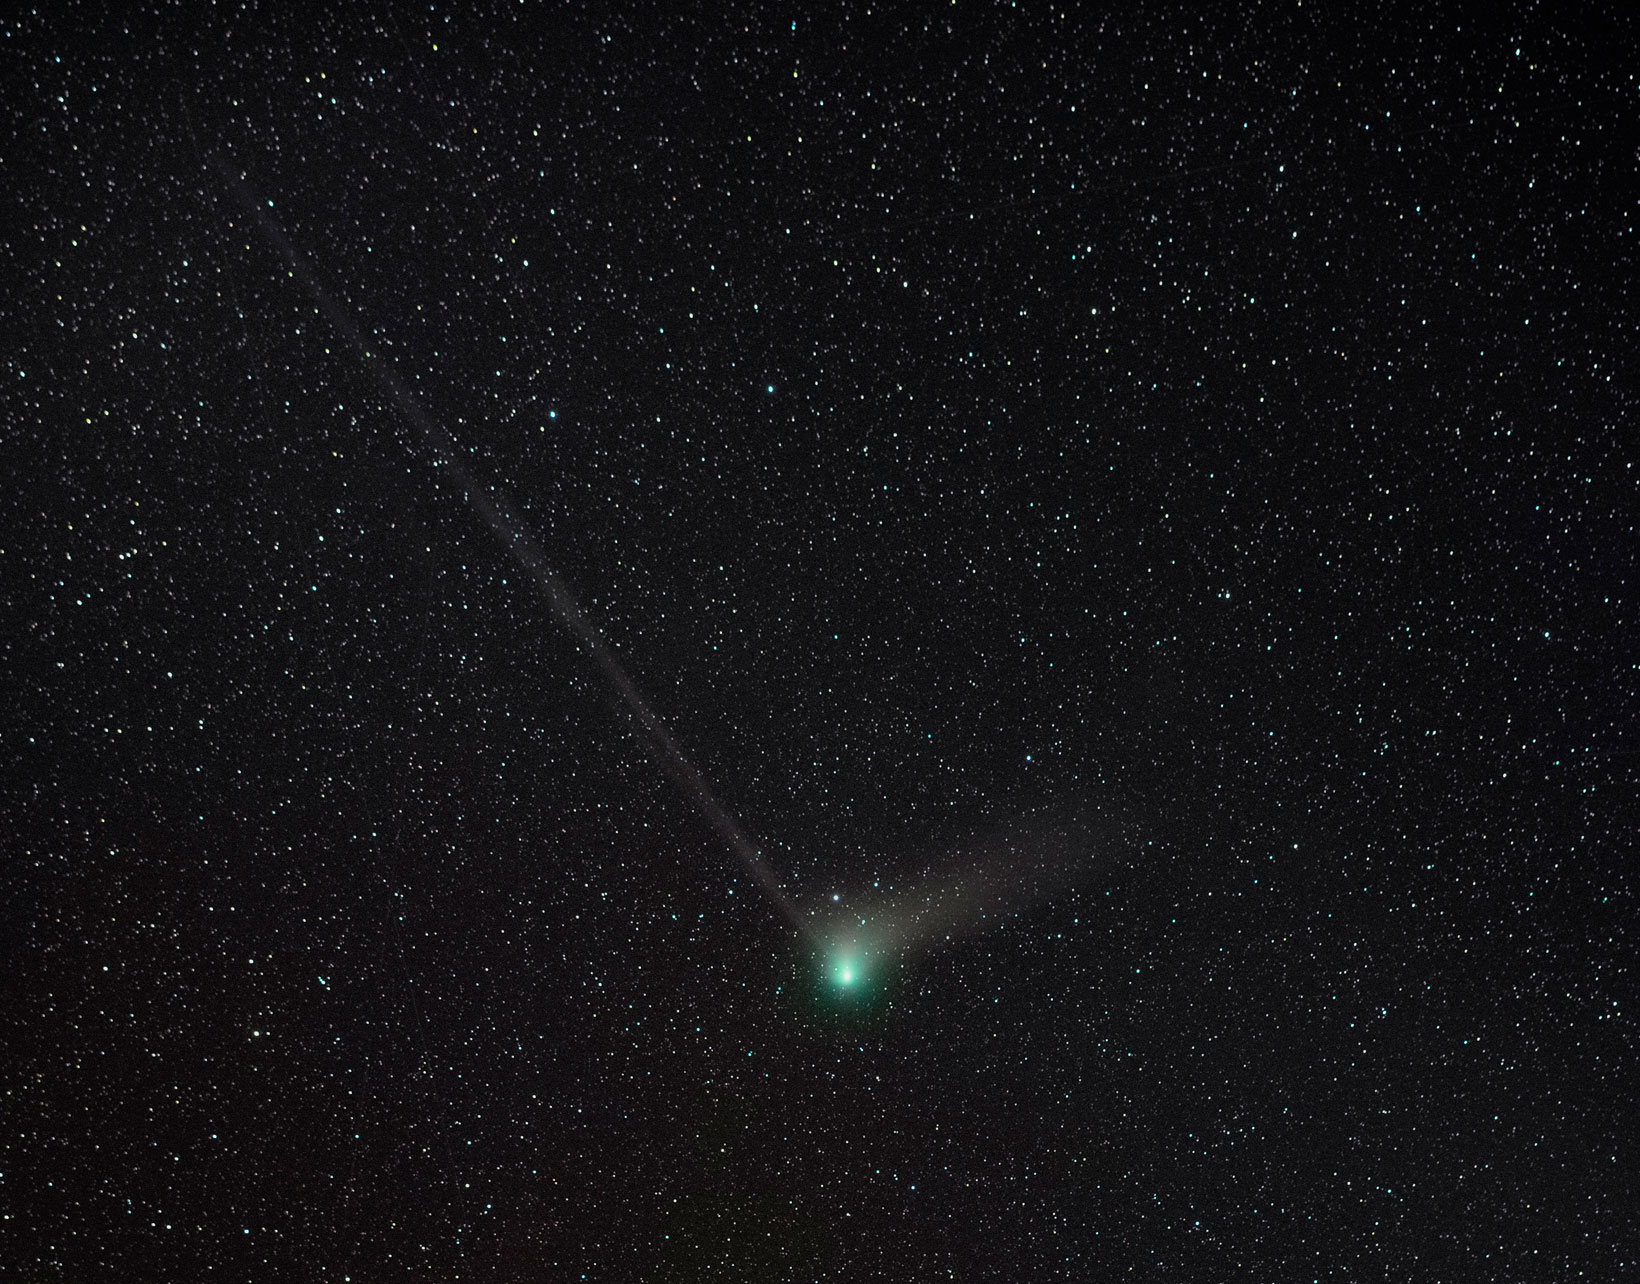 On February 2nd after moonset around 5 a.m., there was only a tiny window opened before sunrise for observing and photographing the green comet, C/2022 E3 (ZTF) at its closest approach to us. To capture this image, I tracked the sky using Kenko SKYMEMO S star tracker for about 20 minutes.